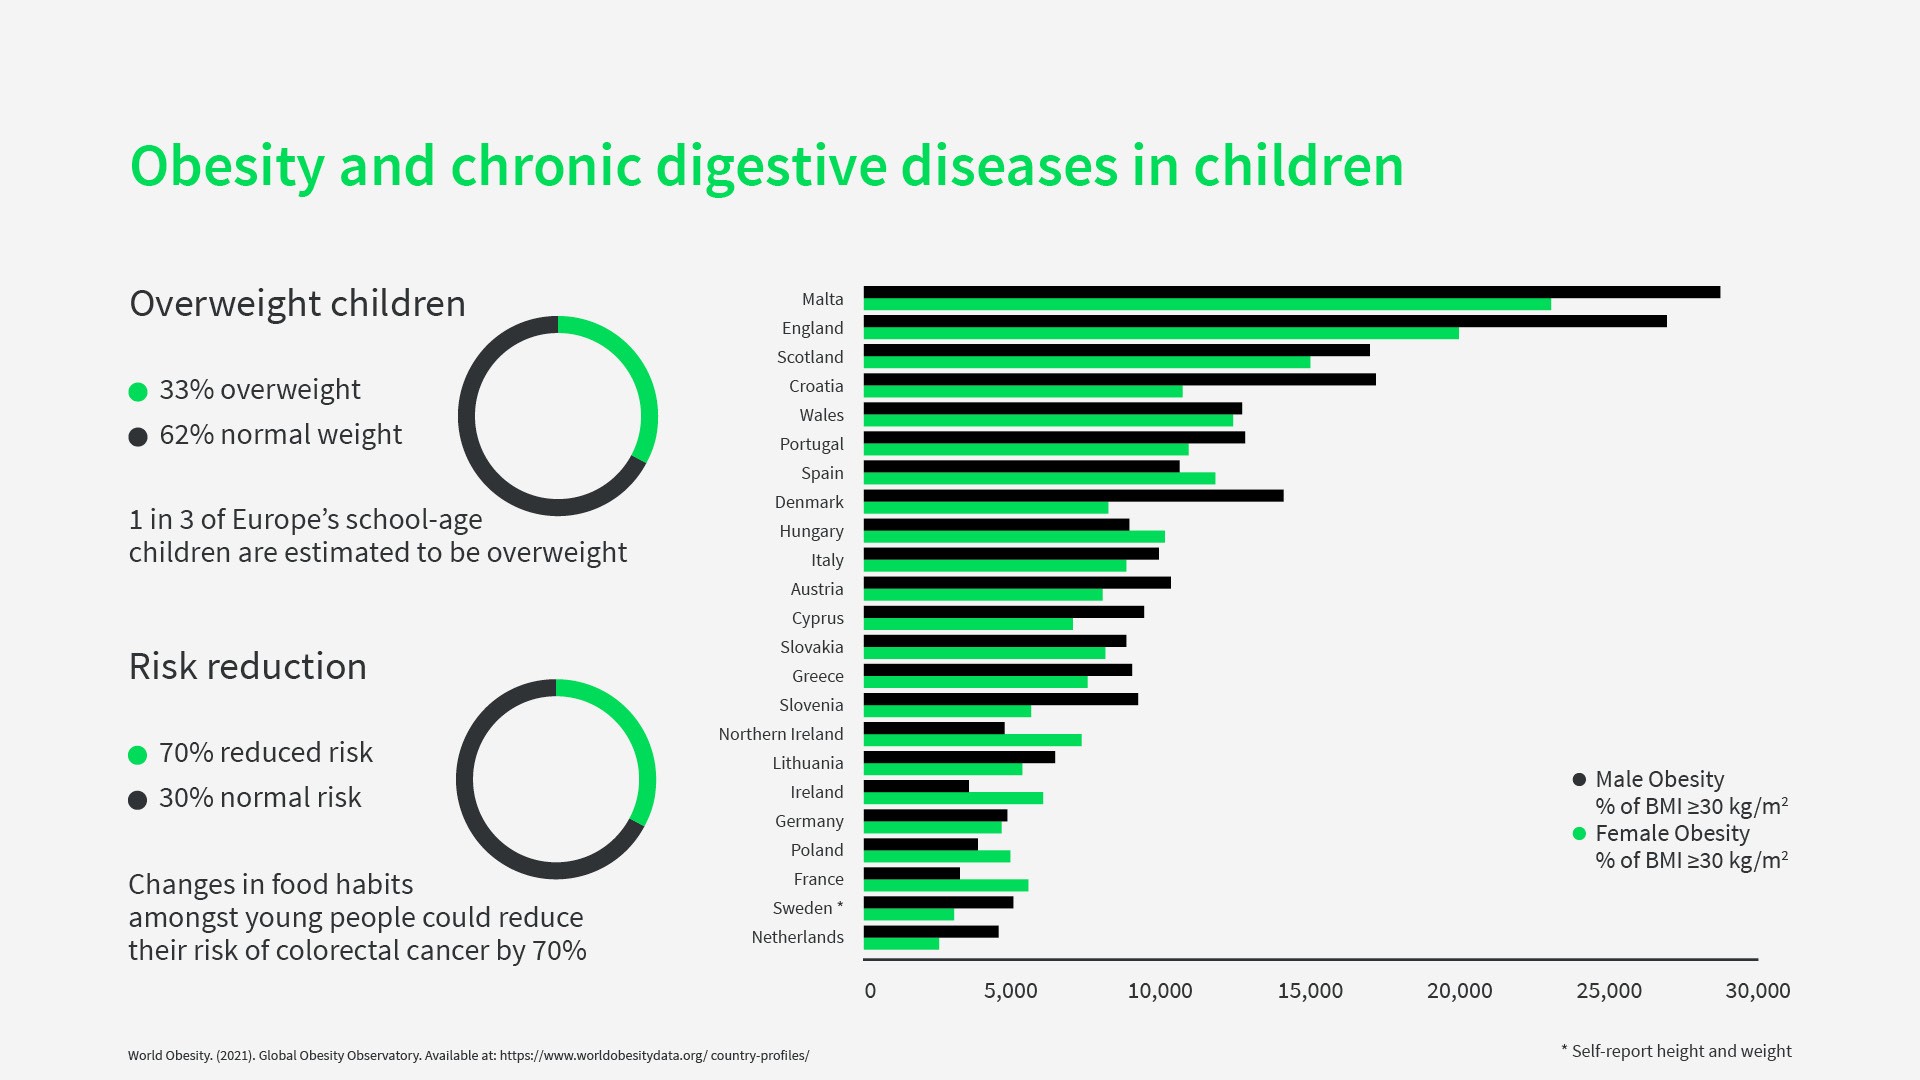 Obesity and digestive diseases in children